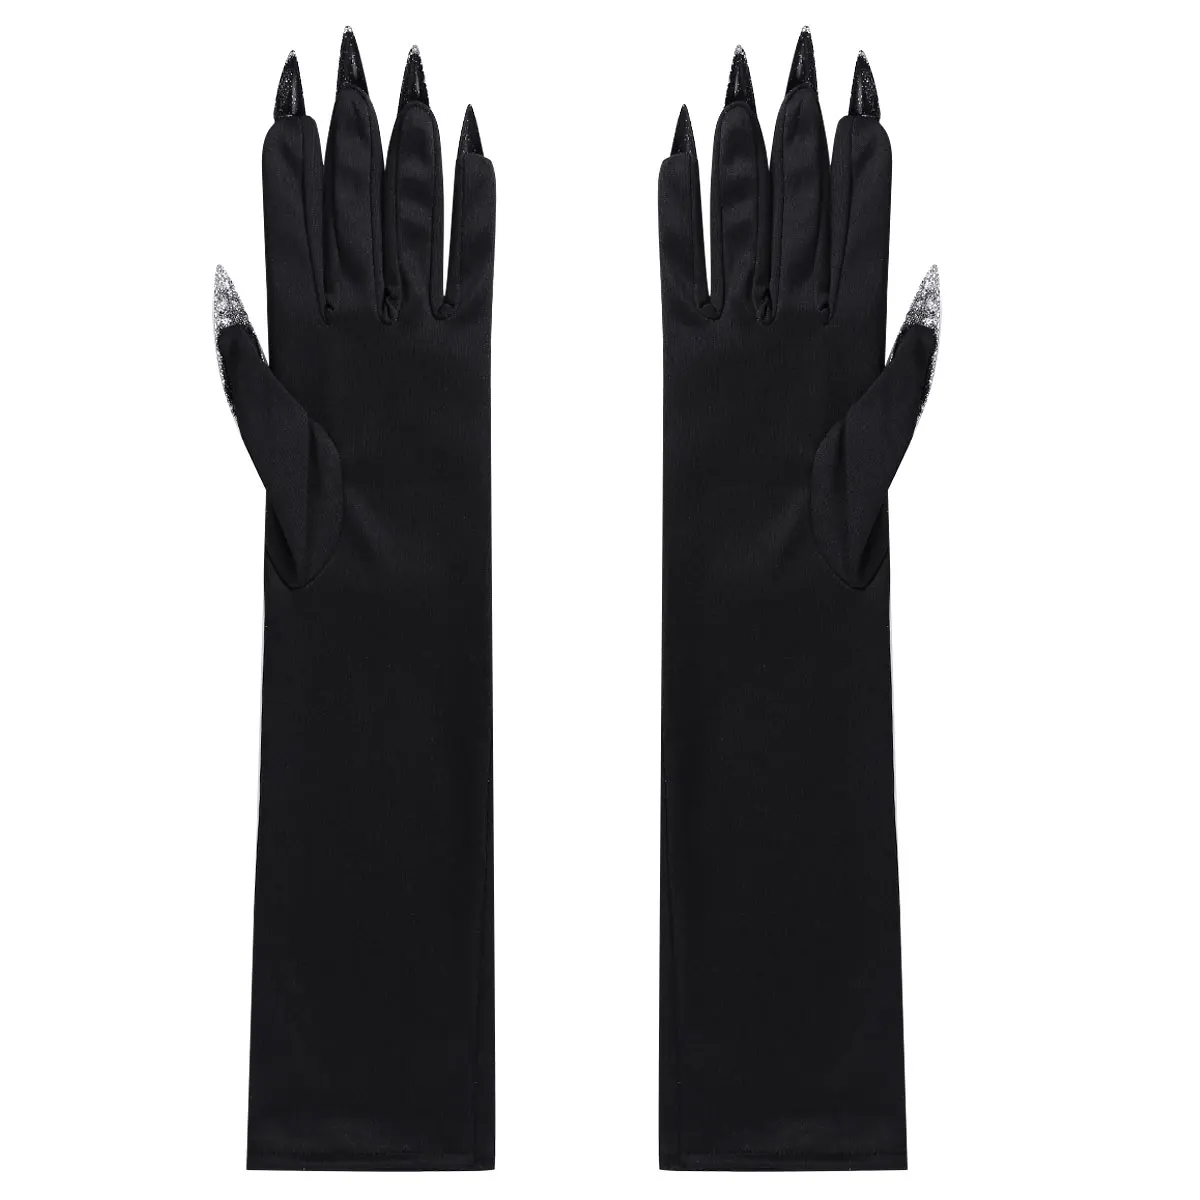 Halloween Fingernails Gloves Long Nails Finger Cosplay Claws Party Scary Props Masquerade Costume Accessory | Тематическая одежда